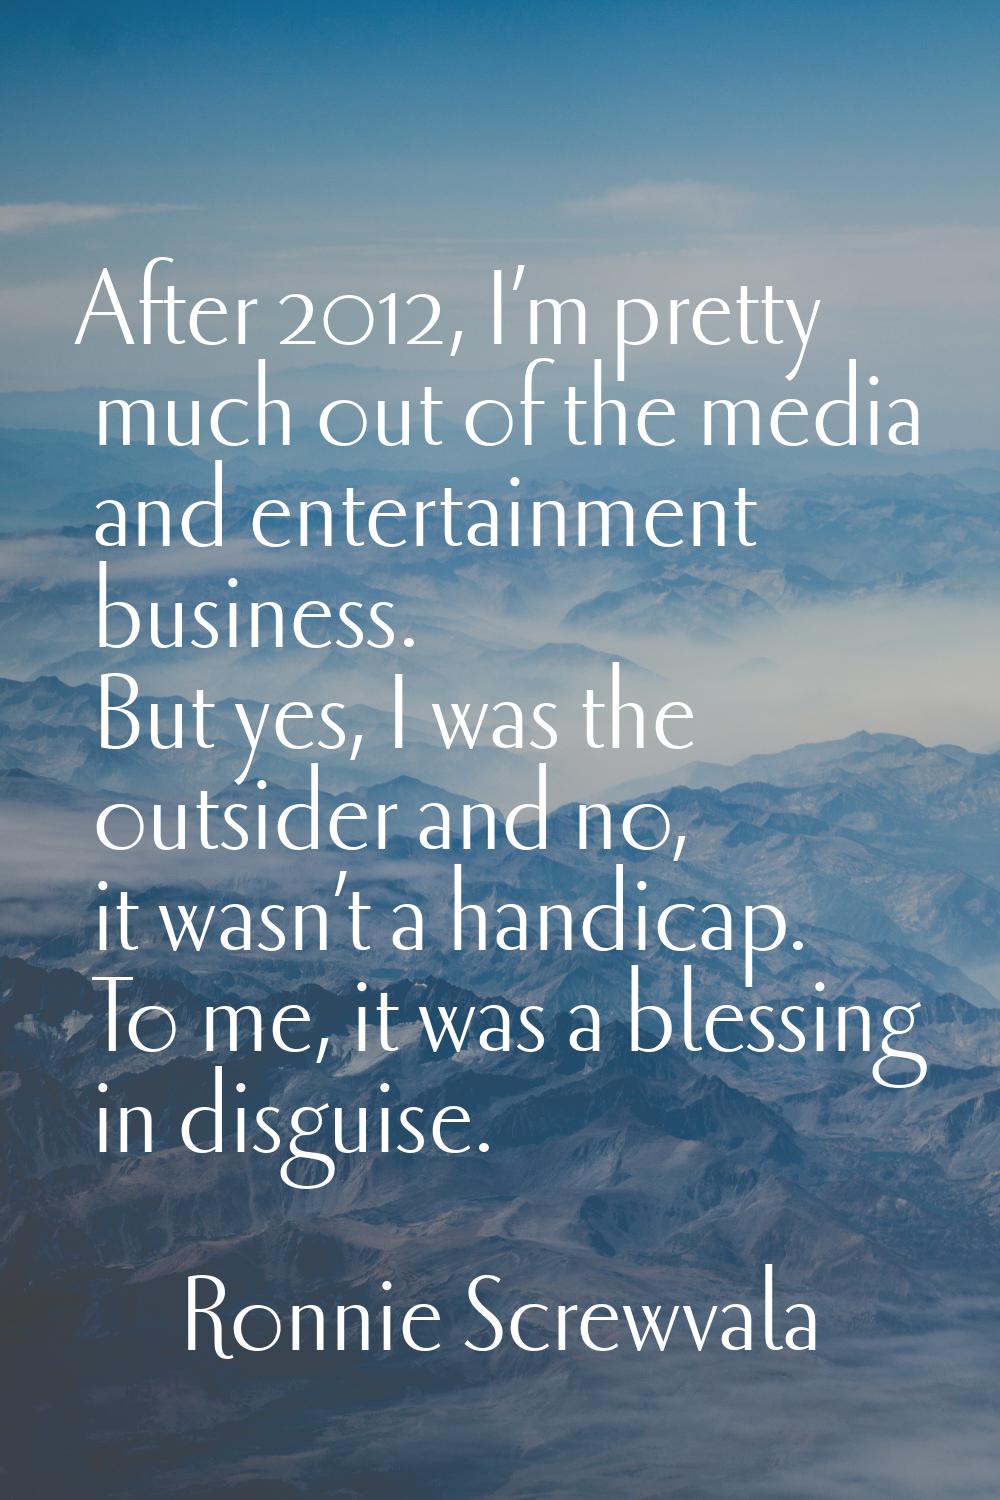 After 2012, I’m pretty much out of the media and entertainment business. But yes, I was the outside